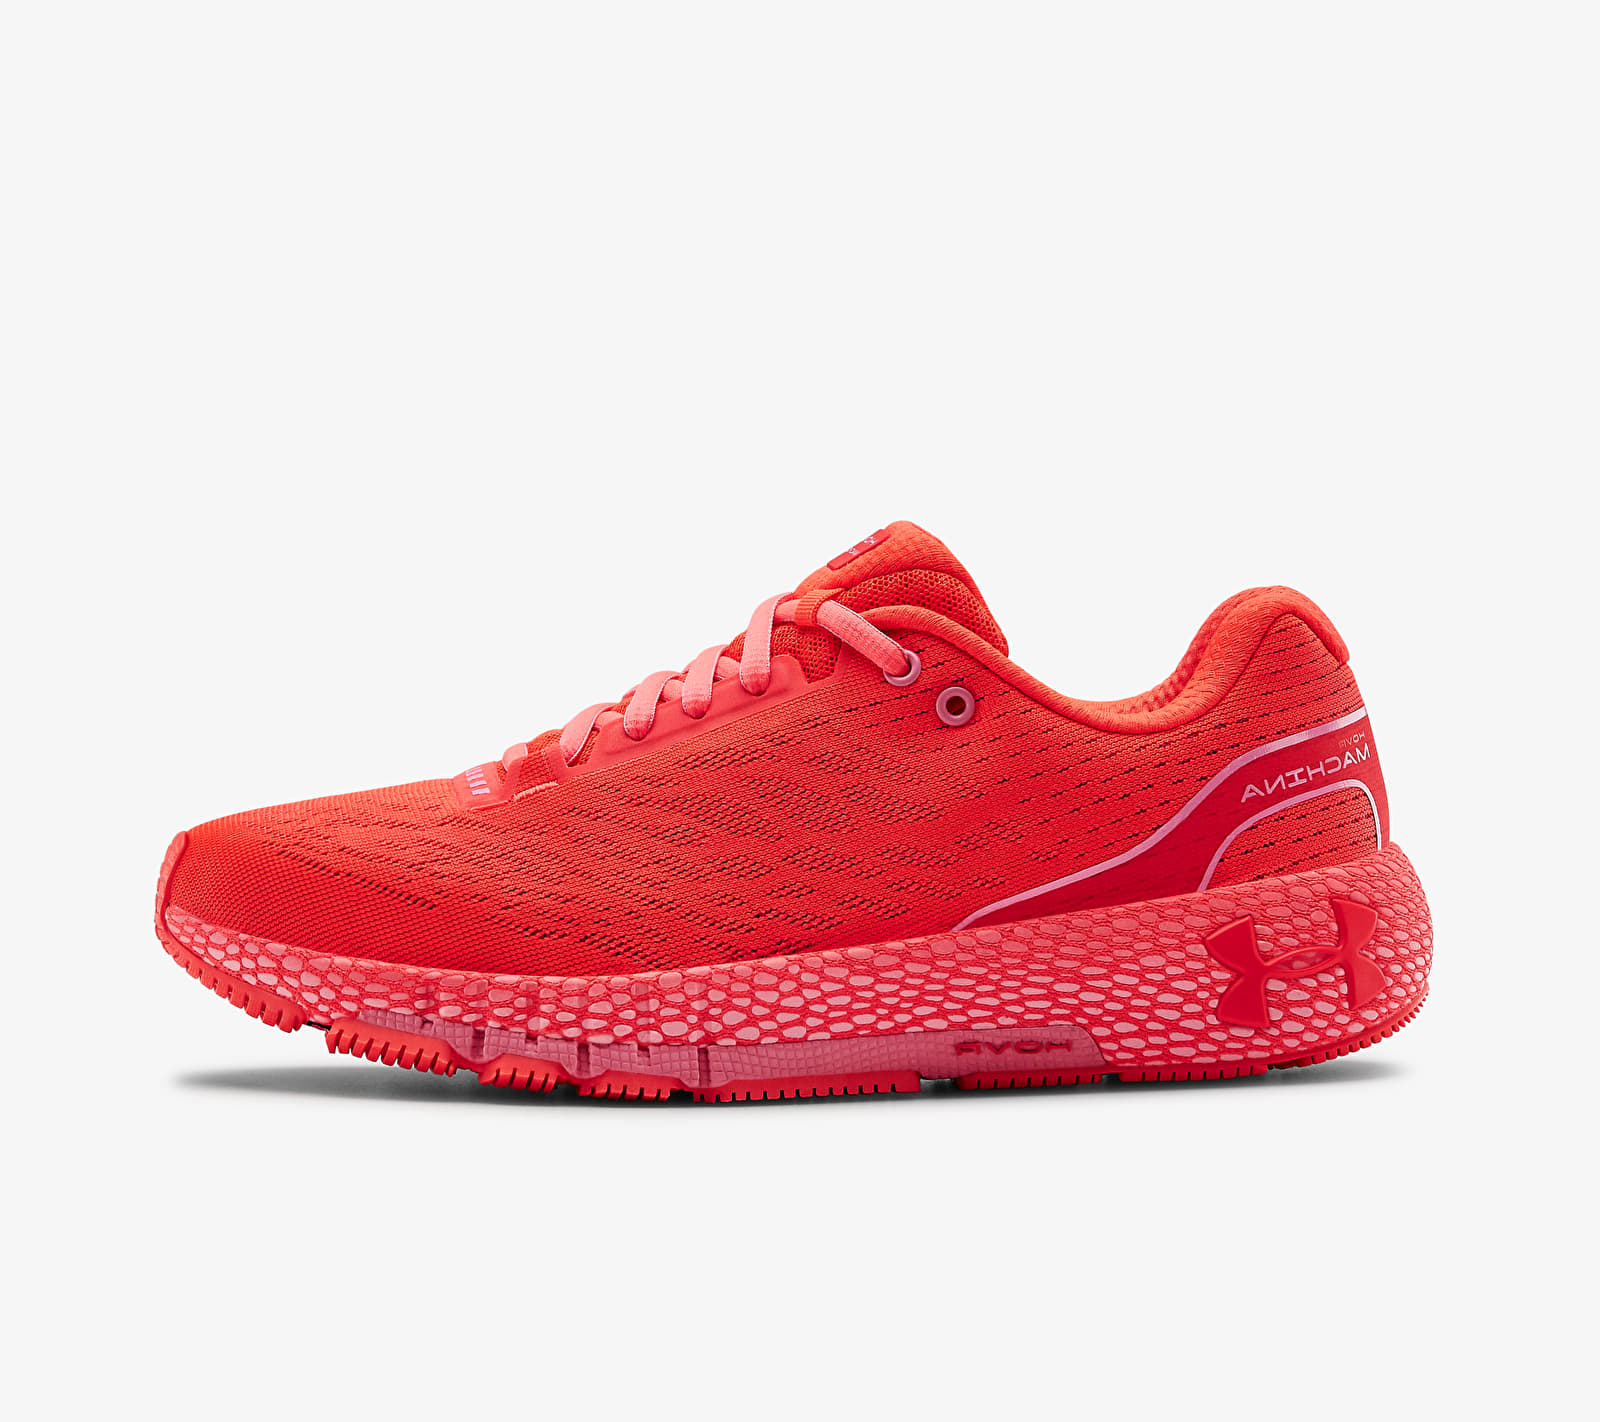 Under Armour W HOVR Machina Red 3021956-602